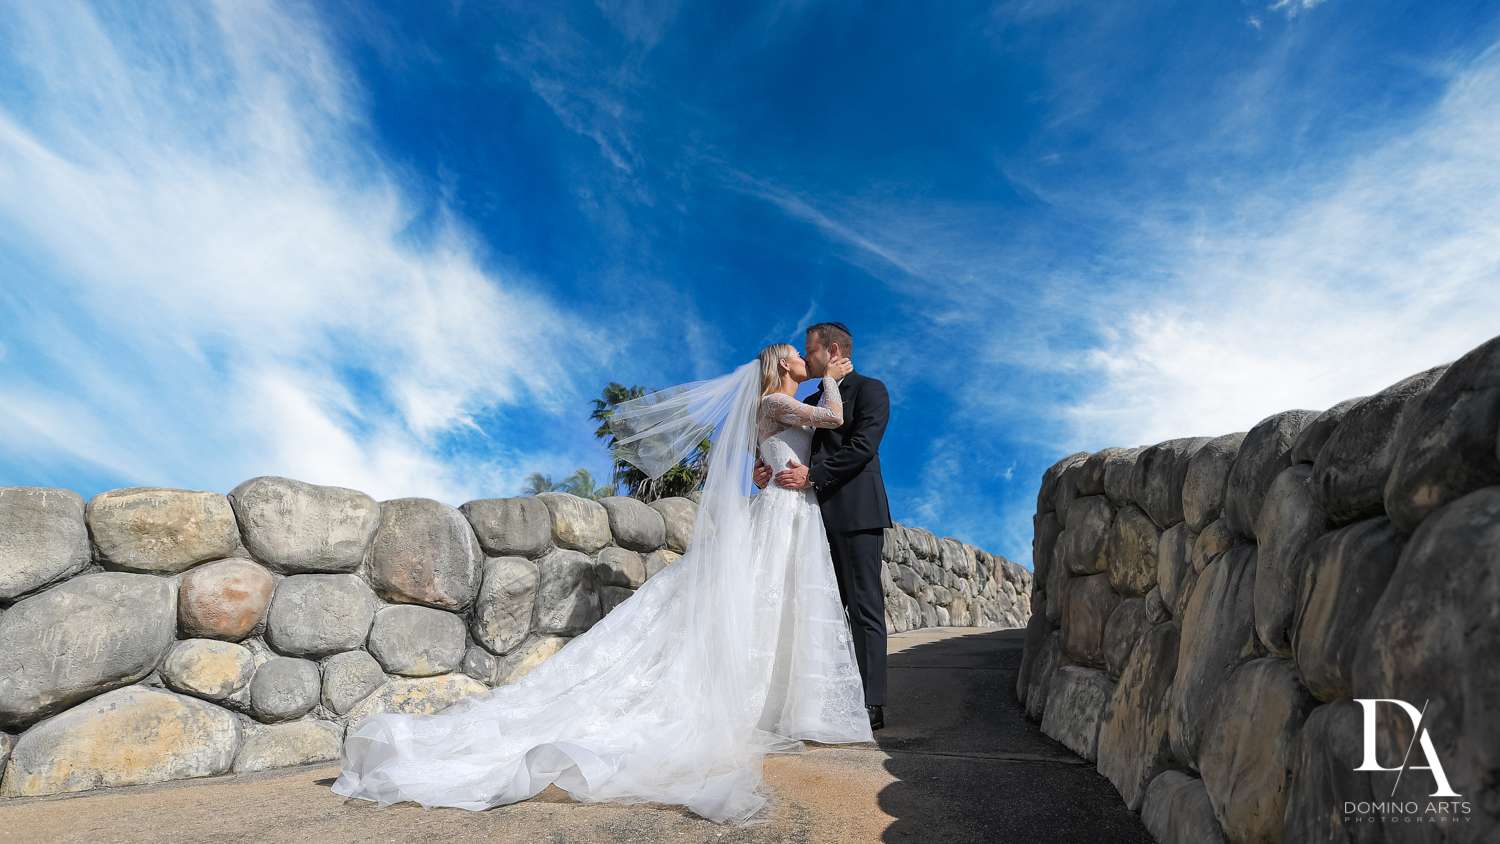 classic wedding portraiture at aventura turnberry wedding by domino arts